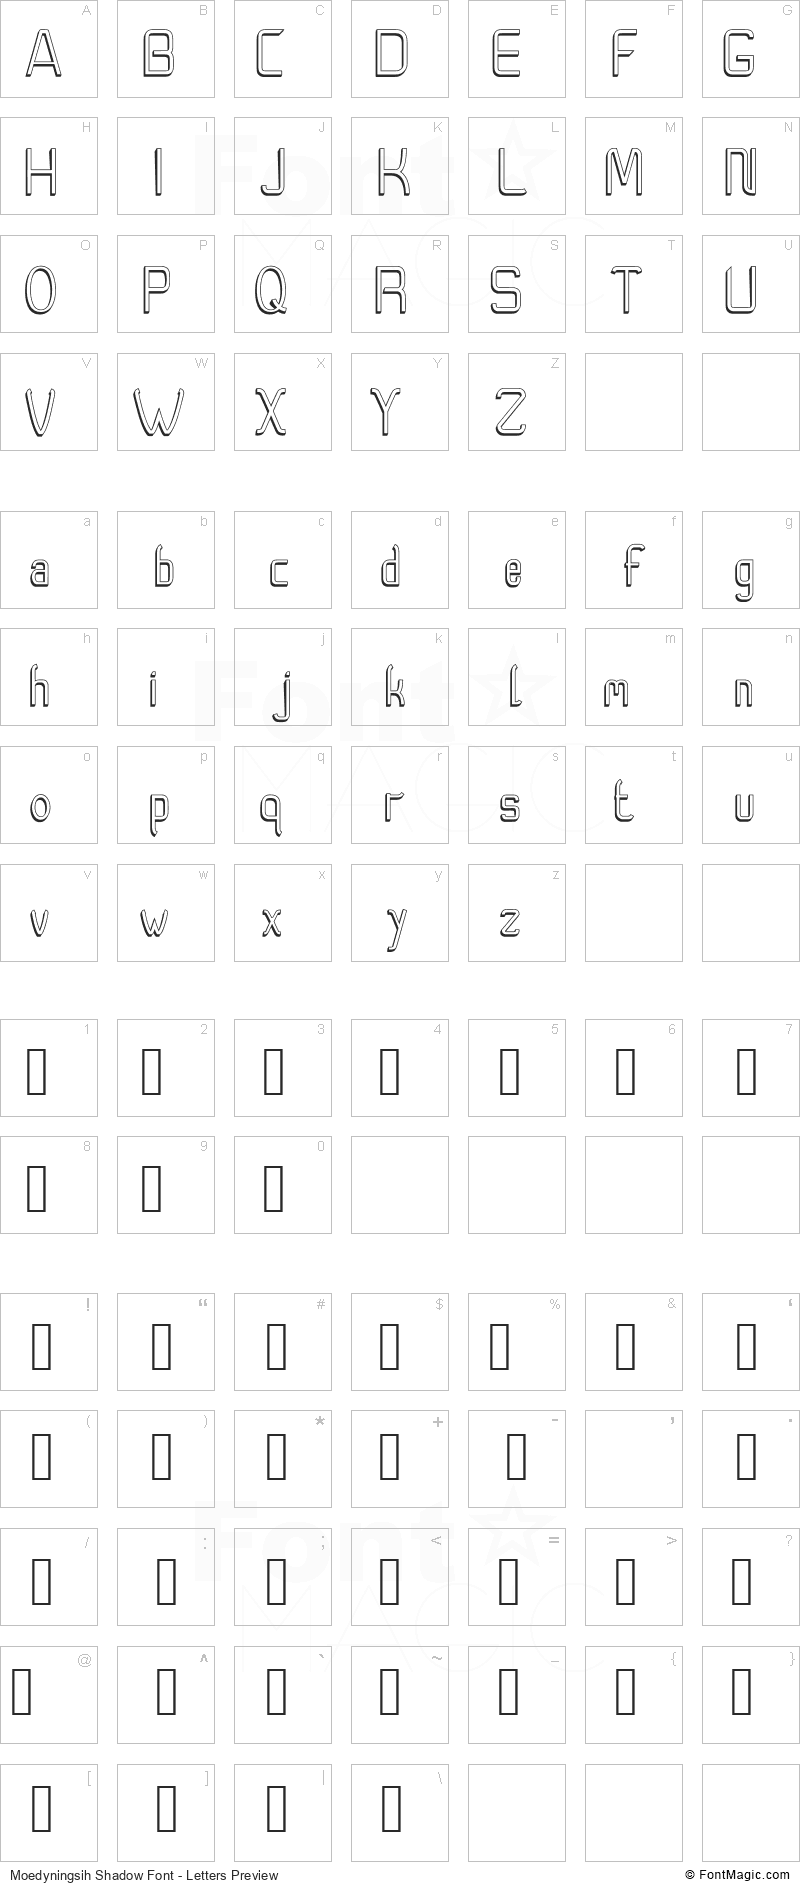 Moedyningsih Shadow Font - All Latters Preview Chart